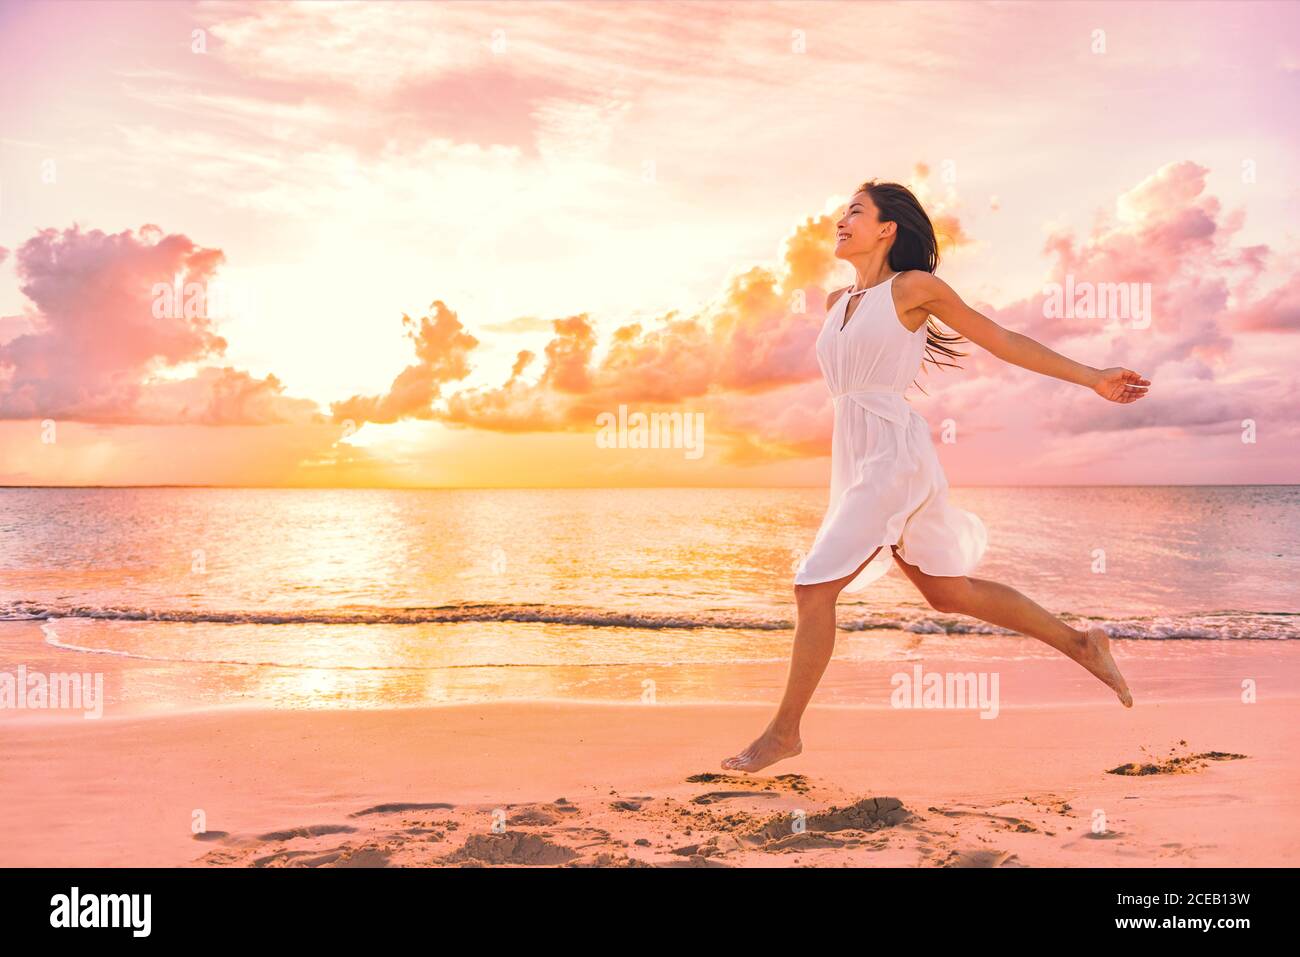 Freedom wellness well-being happiness concept. Happy carefree Asian woman feeling blissful jumping of joy on peaceful beach at sunset. Serenity Stock Photo